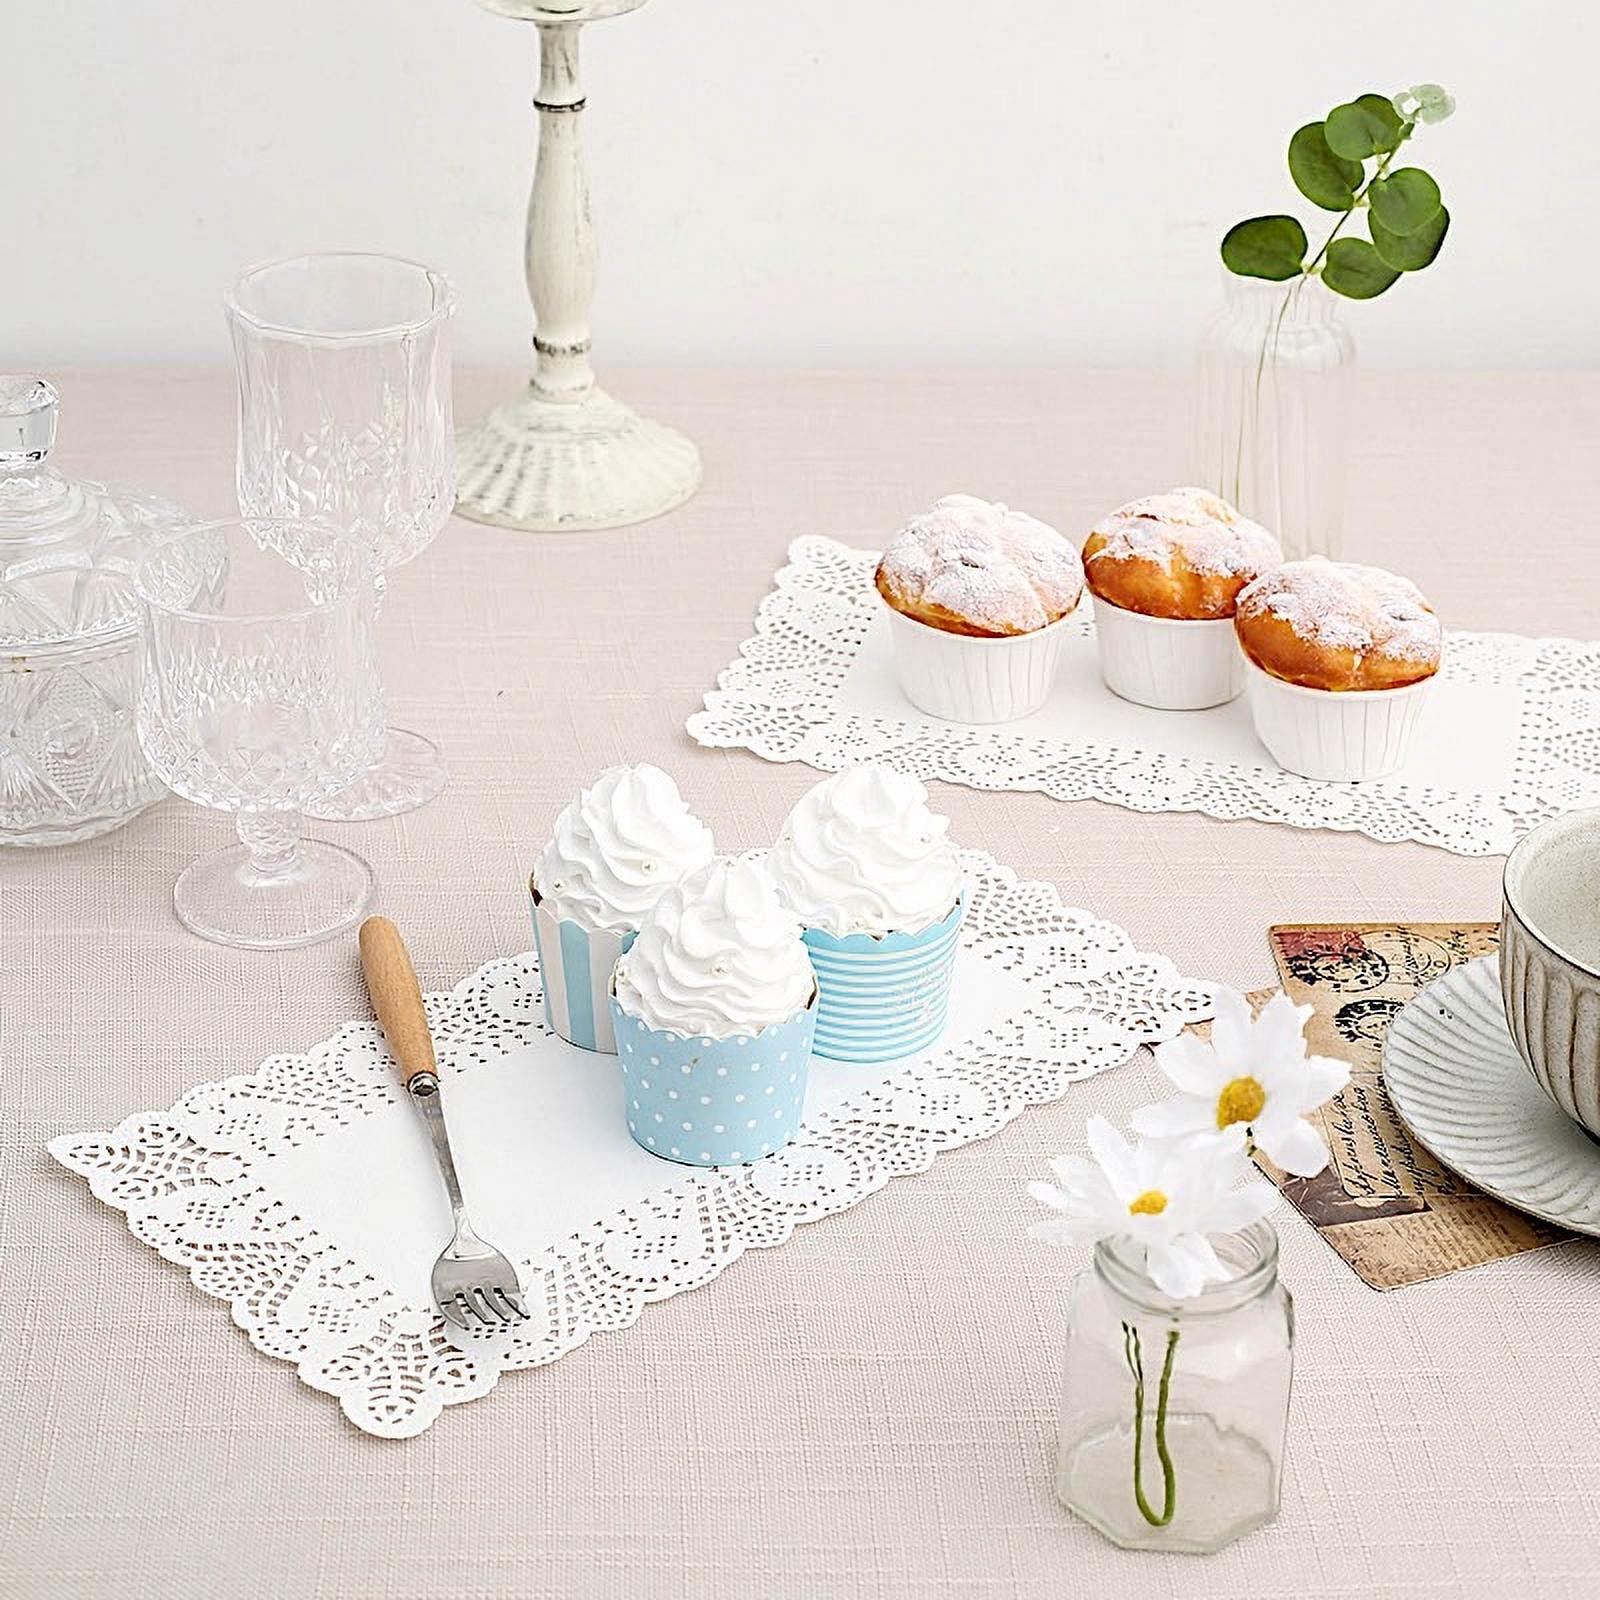 SCHOLMART Paper Doilies Rectangle Assorted Sizes, Assorted Disposable Paper  Lace, Birthday Tea Party Disposable Party Placemats, Tableware Cake